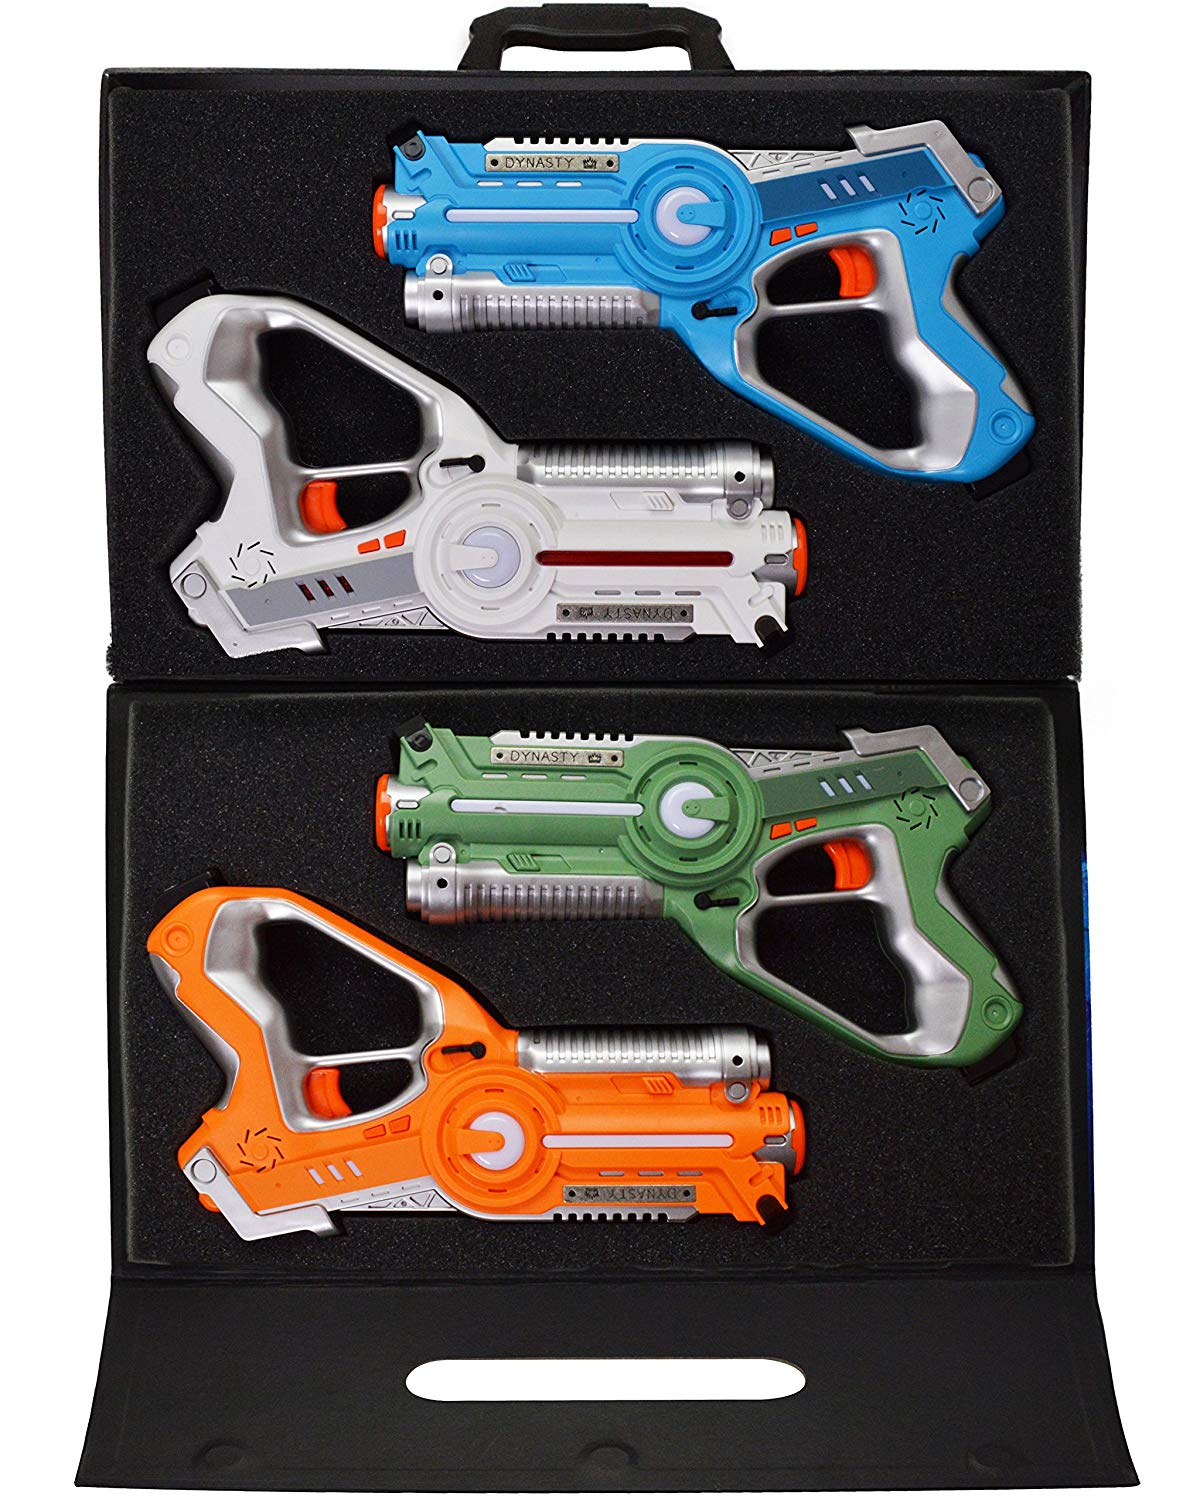 Laser Tag Set Toys and Carrying Case for Kids